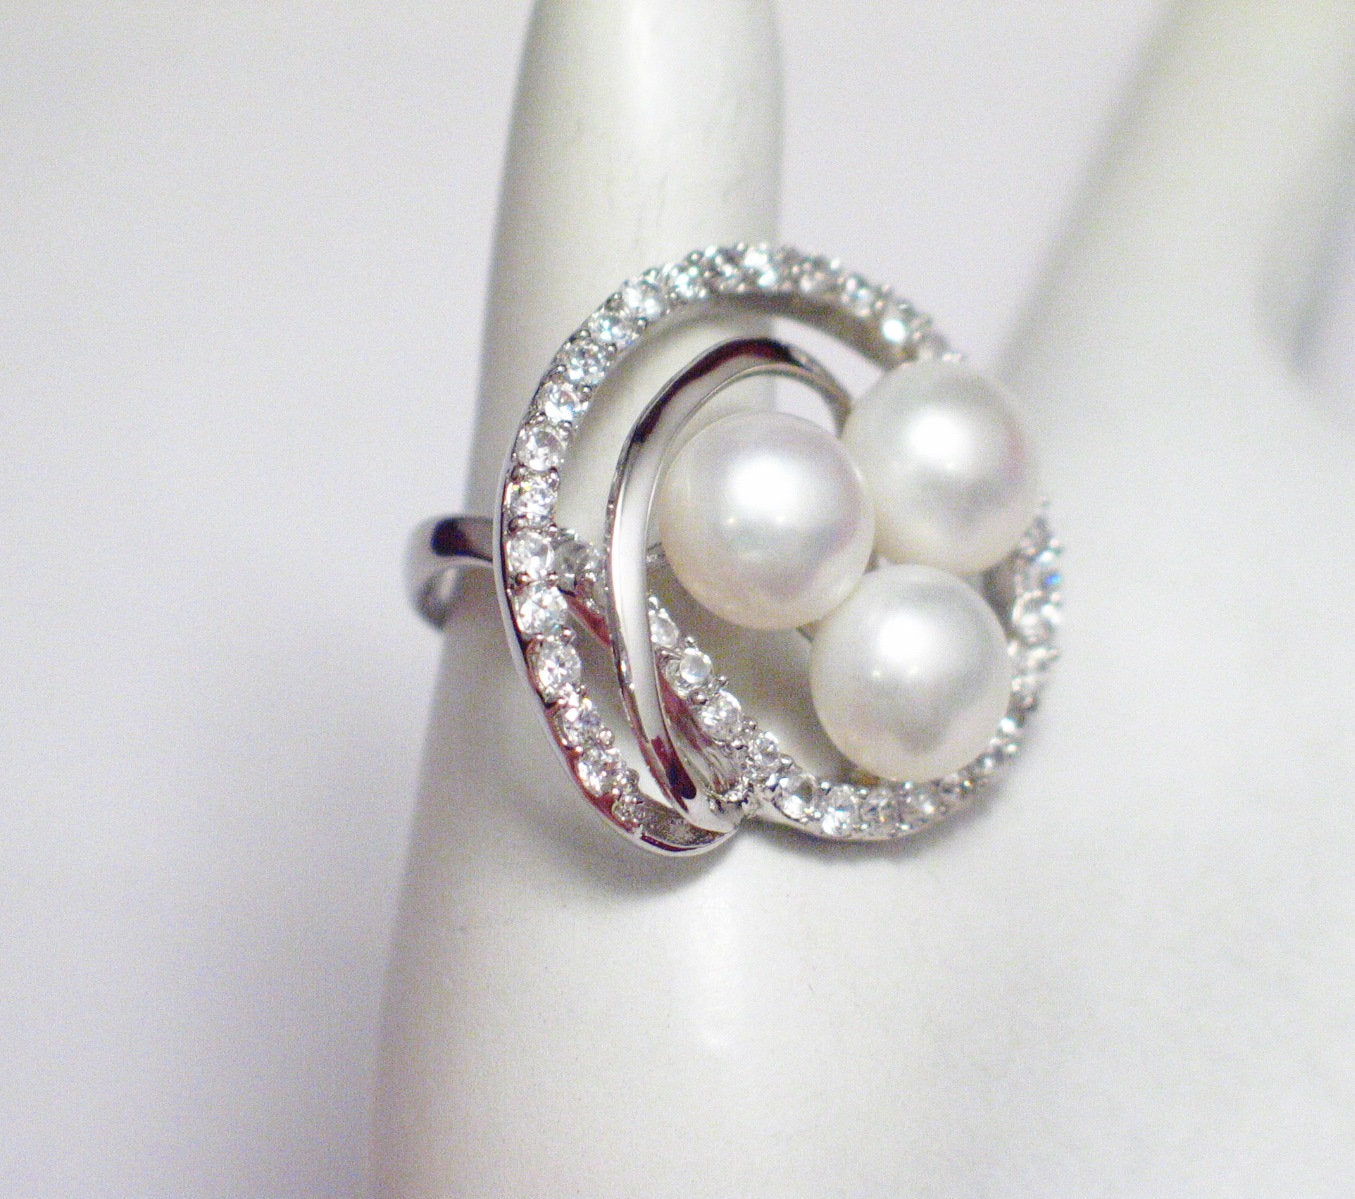 Pearl Ring, Woman's White Glittery Cz Stone Wide Spiral Halo Design Cocktail Statement Ring